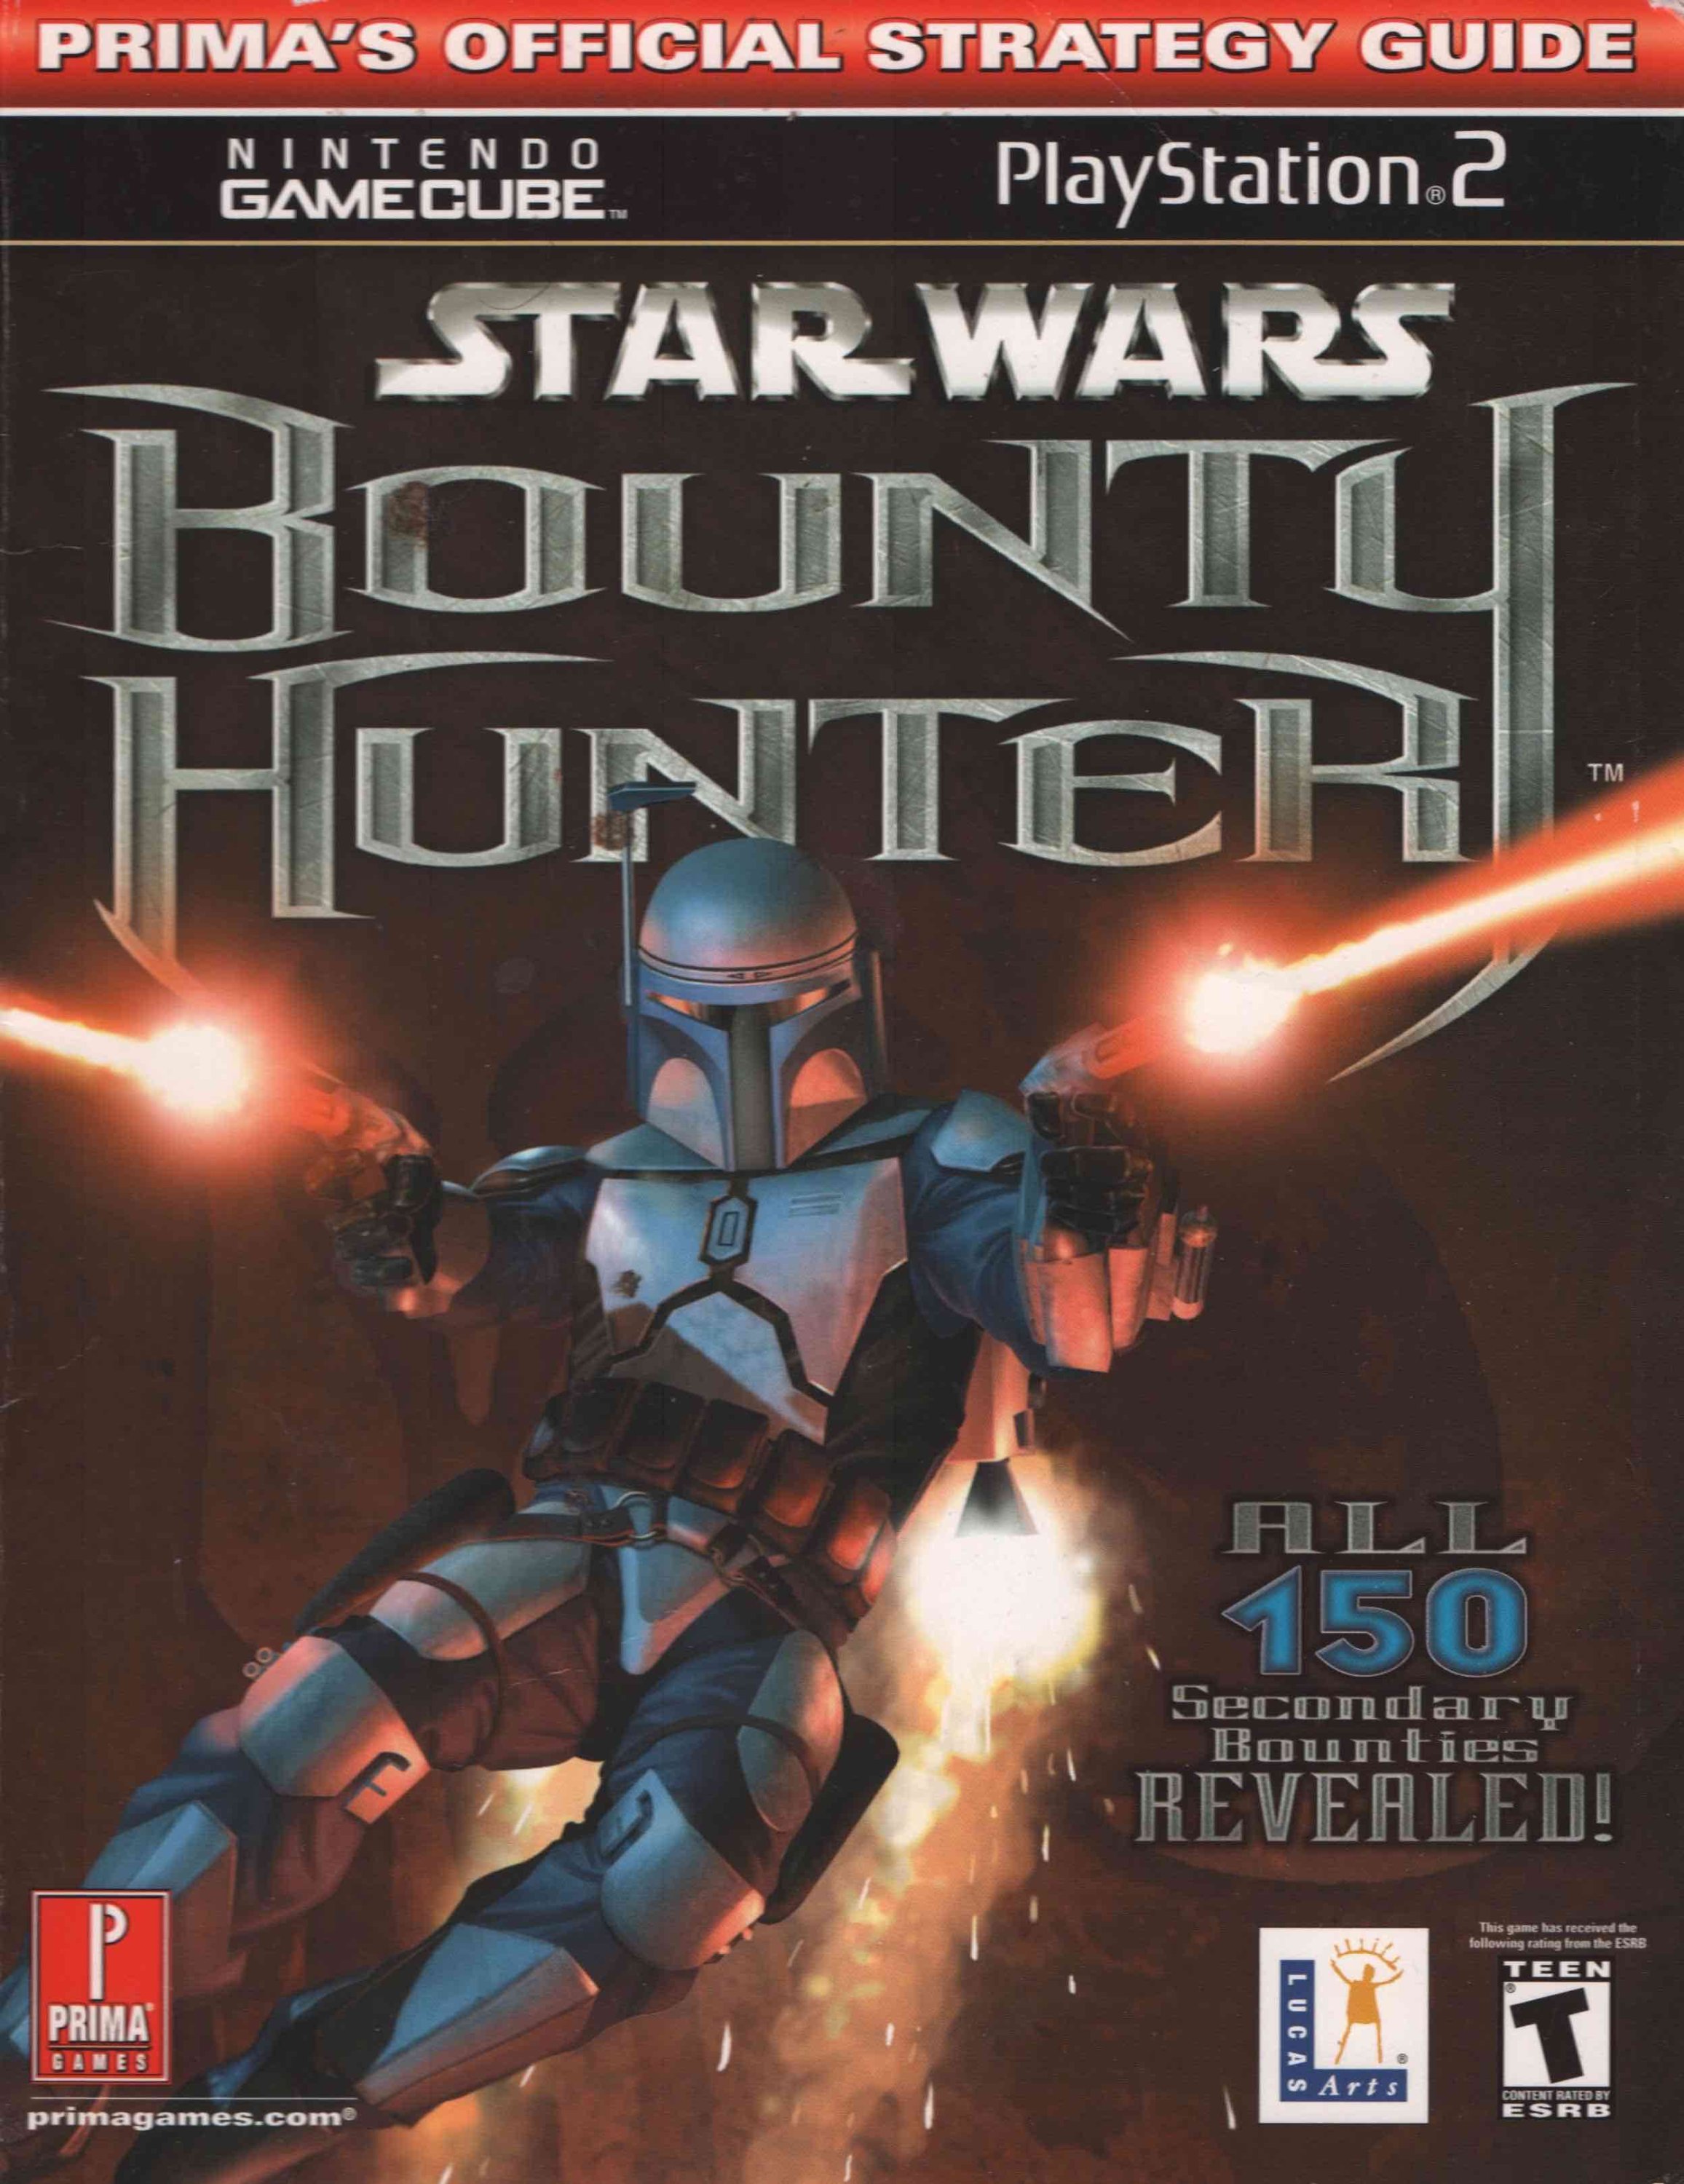 Star Wars Bounty Hunter - Prima's Official Strategy Guide (2002).jpeg